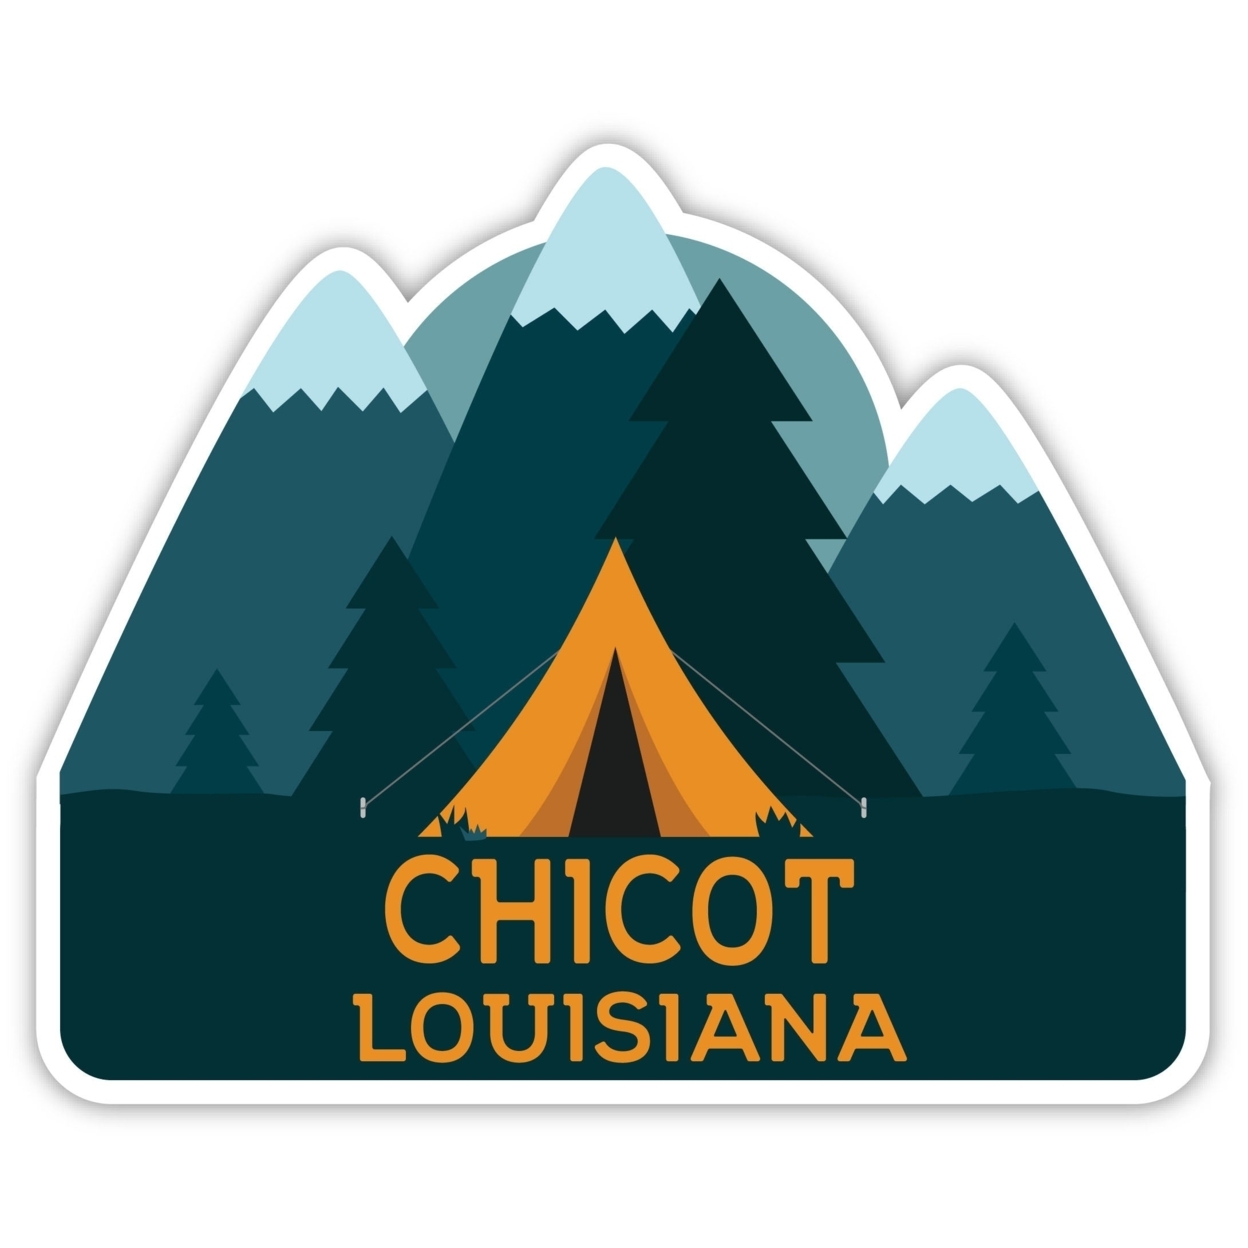 Chicot Louisiana Souvenir Decorative Stickers (Choose Theme And Size) - 4-Pack, 10-Inch, Tent